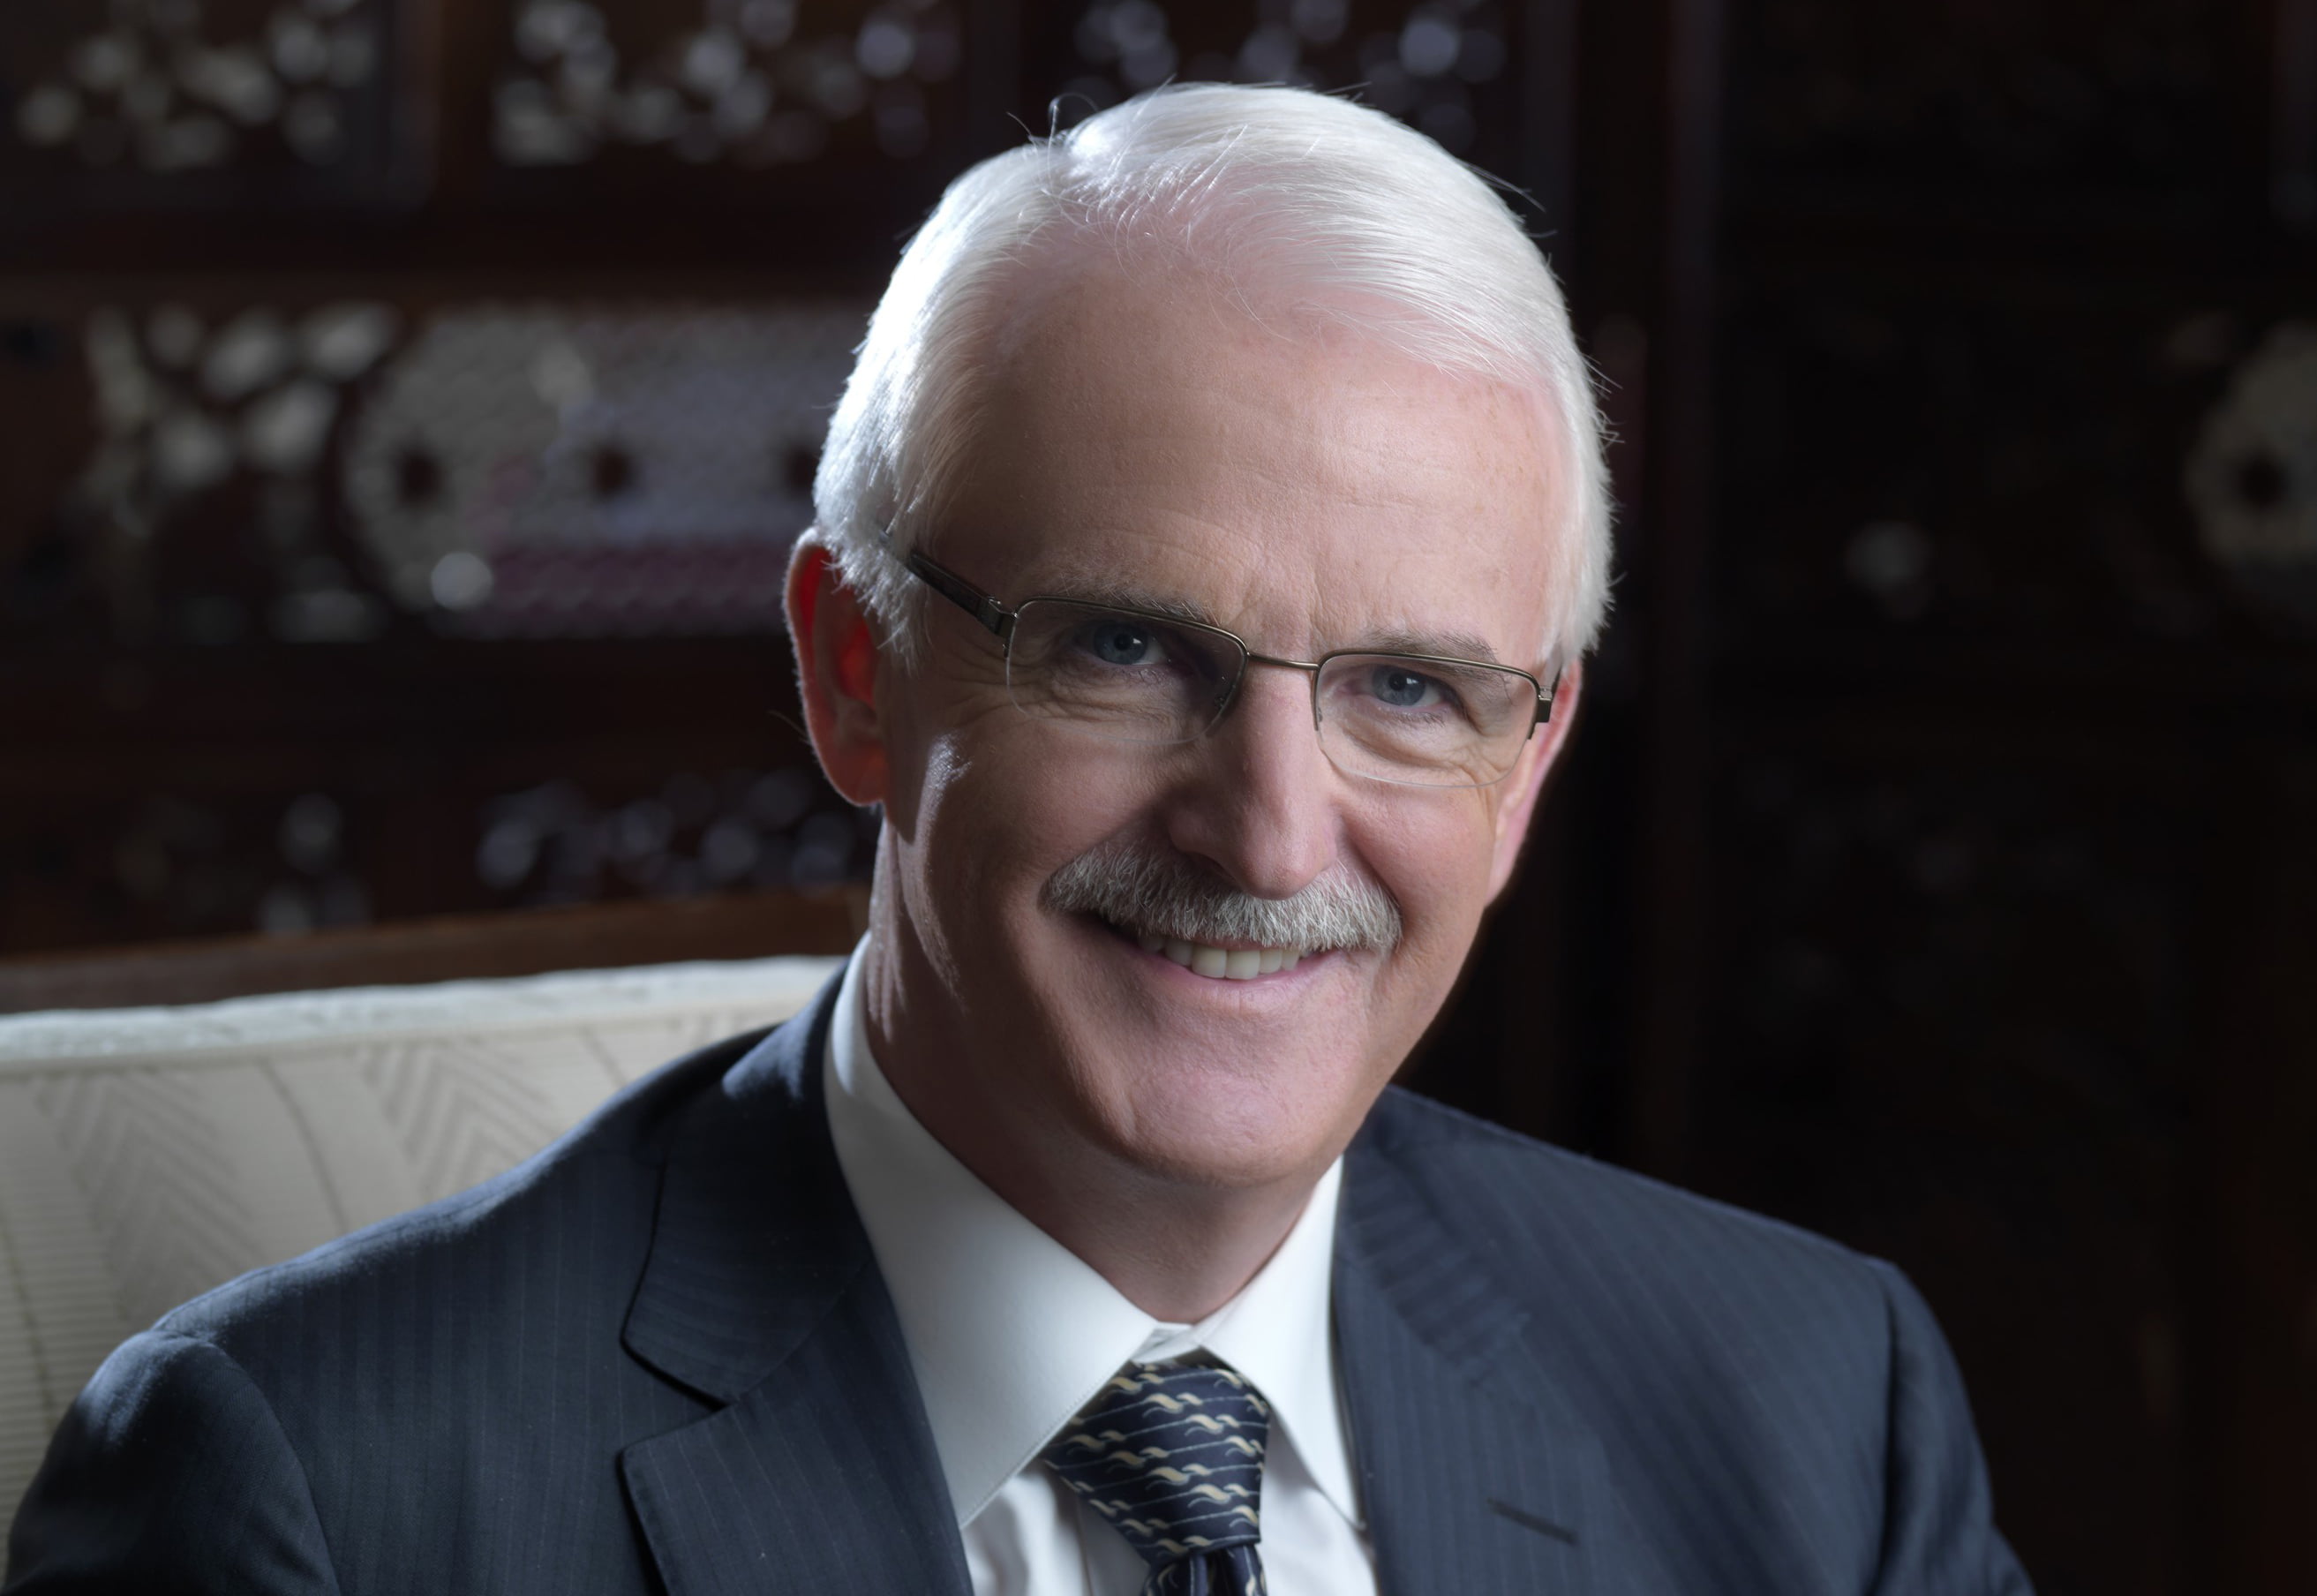 Mr. Gerald Lawless, President and Group CEO, Jumeirah Group